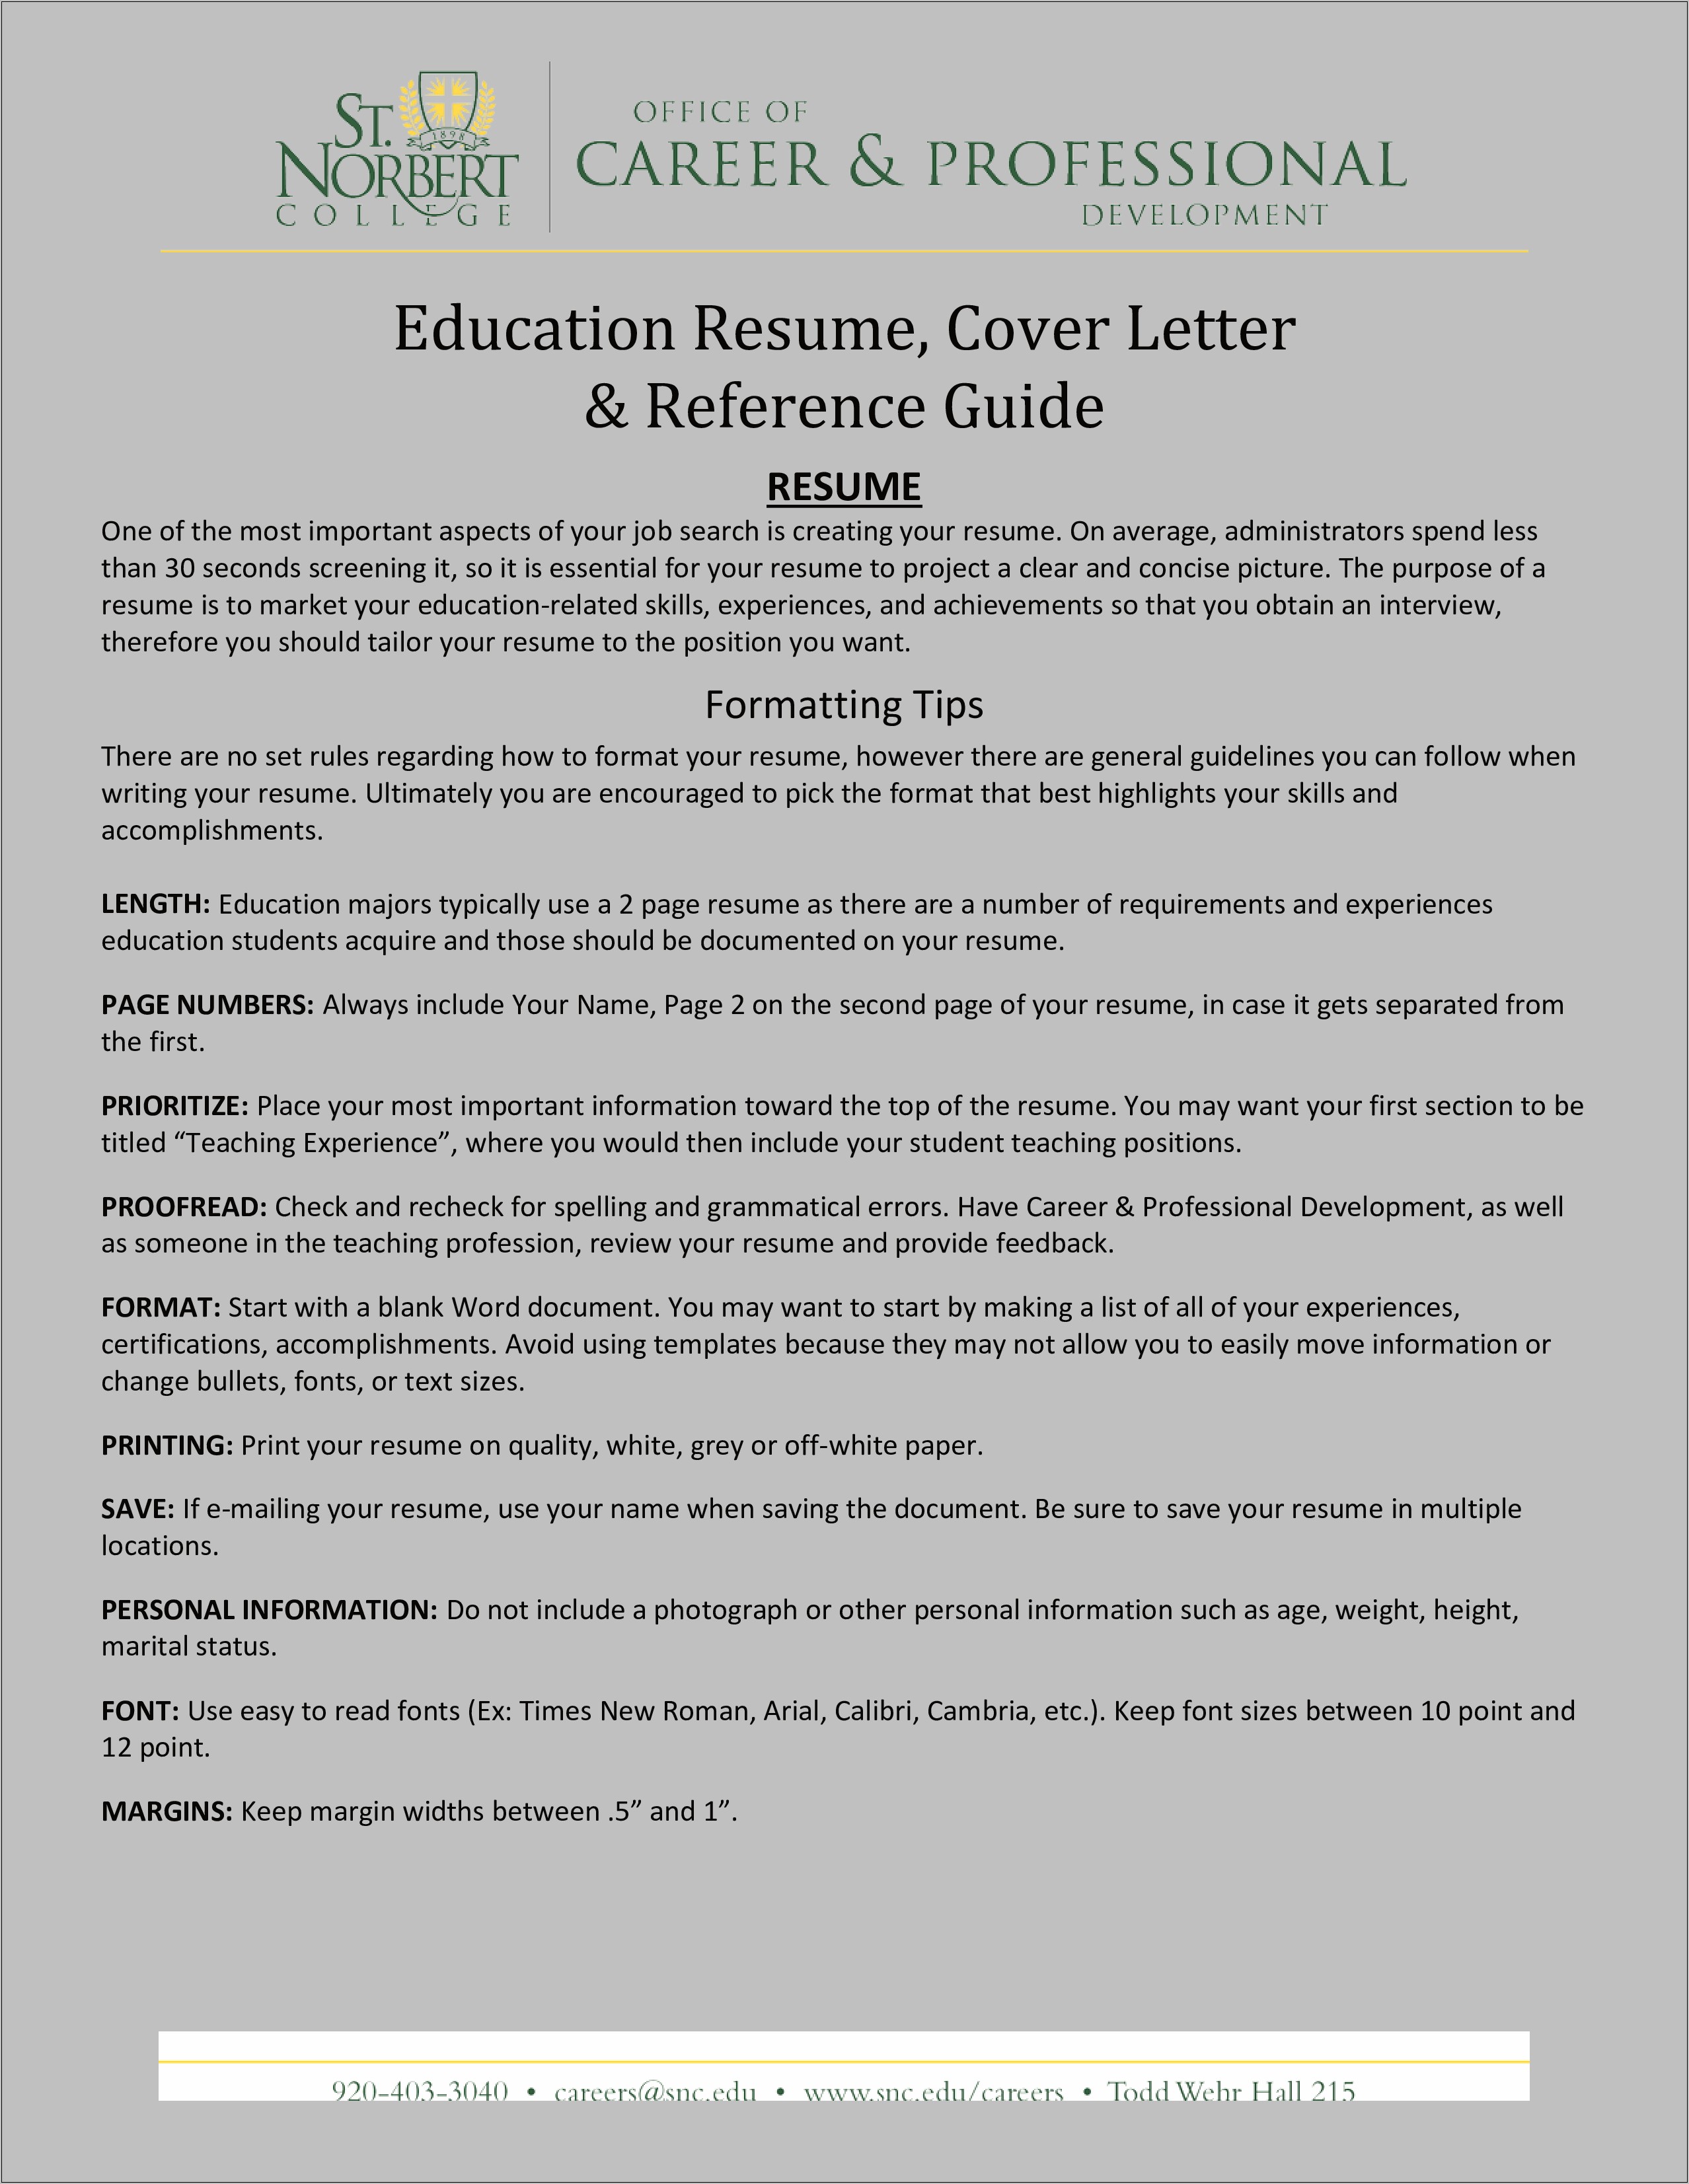 Proper Font For Resume And Cover Letter